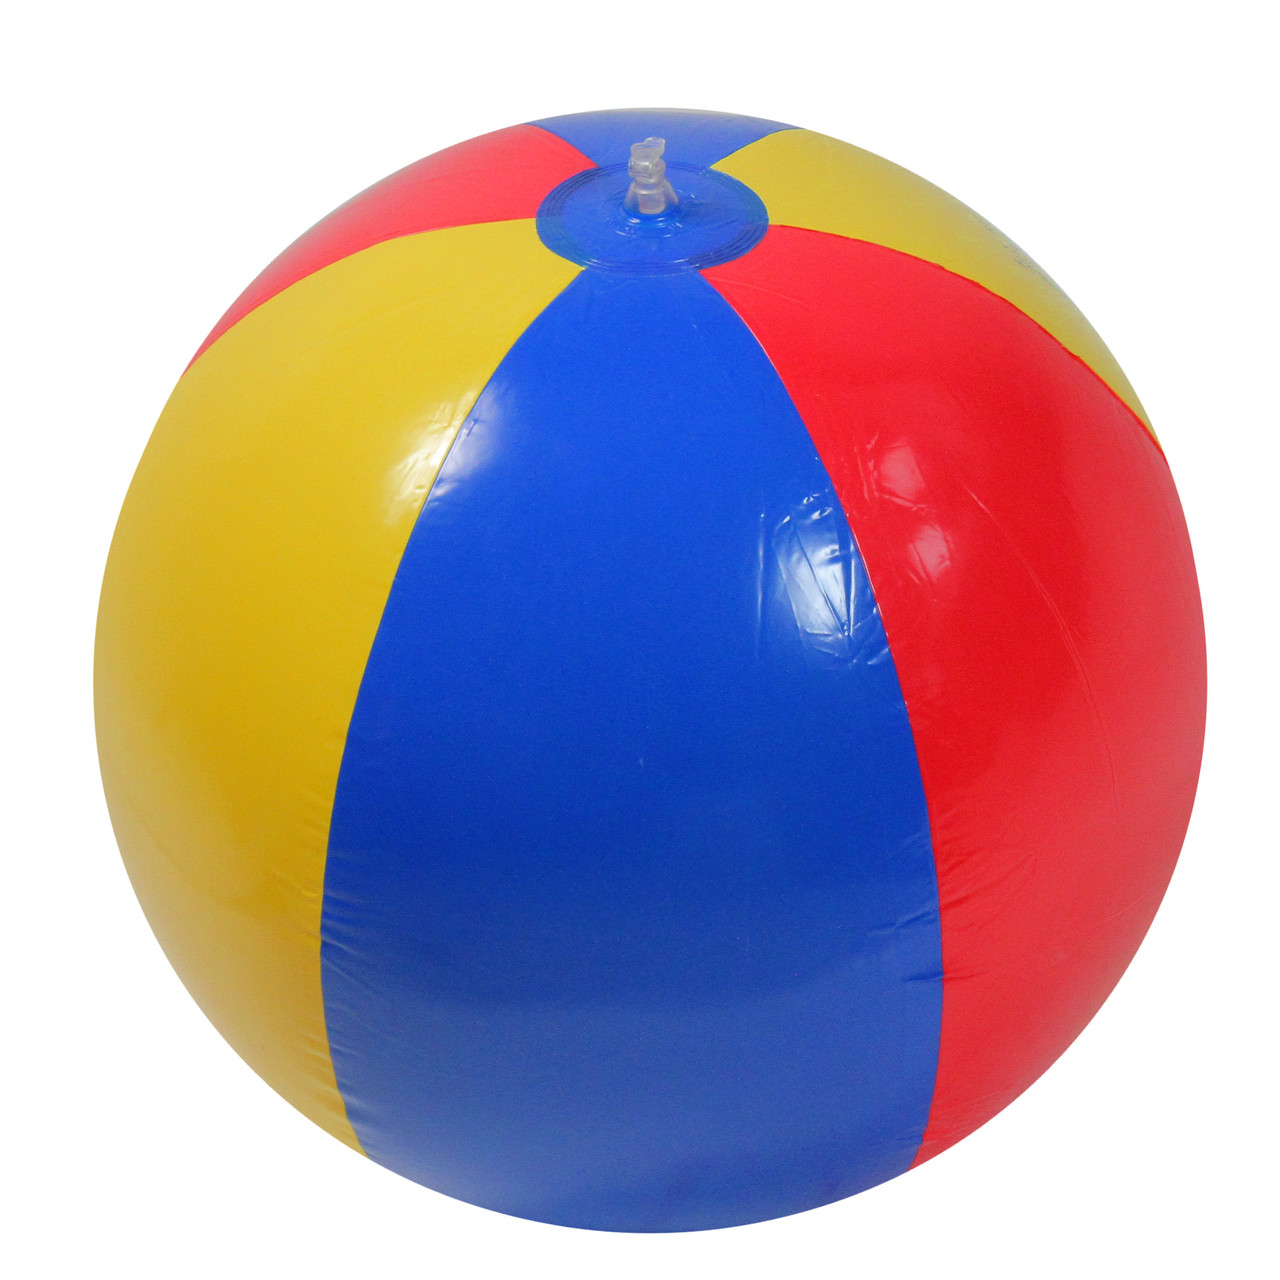 24" Inflatable Beach Ball Kids Adult Swimming Garden Pool Holiday Fun Party Toy 